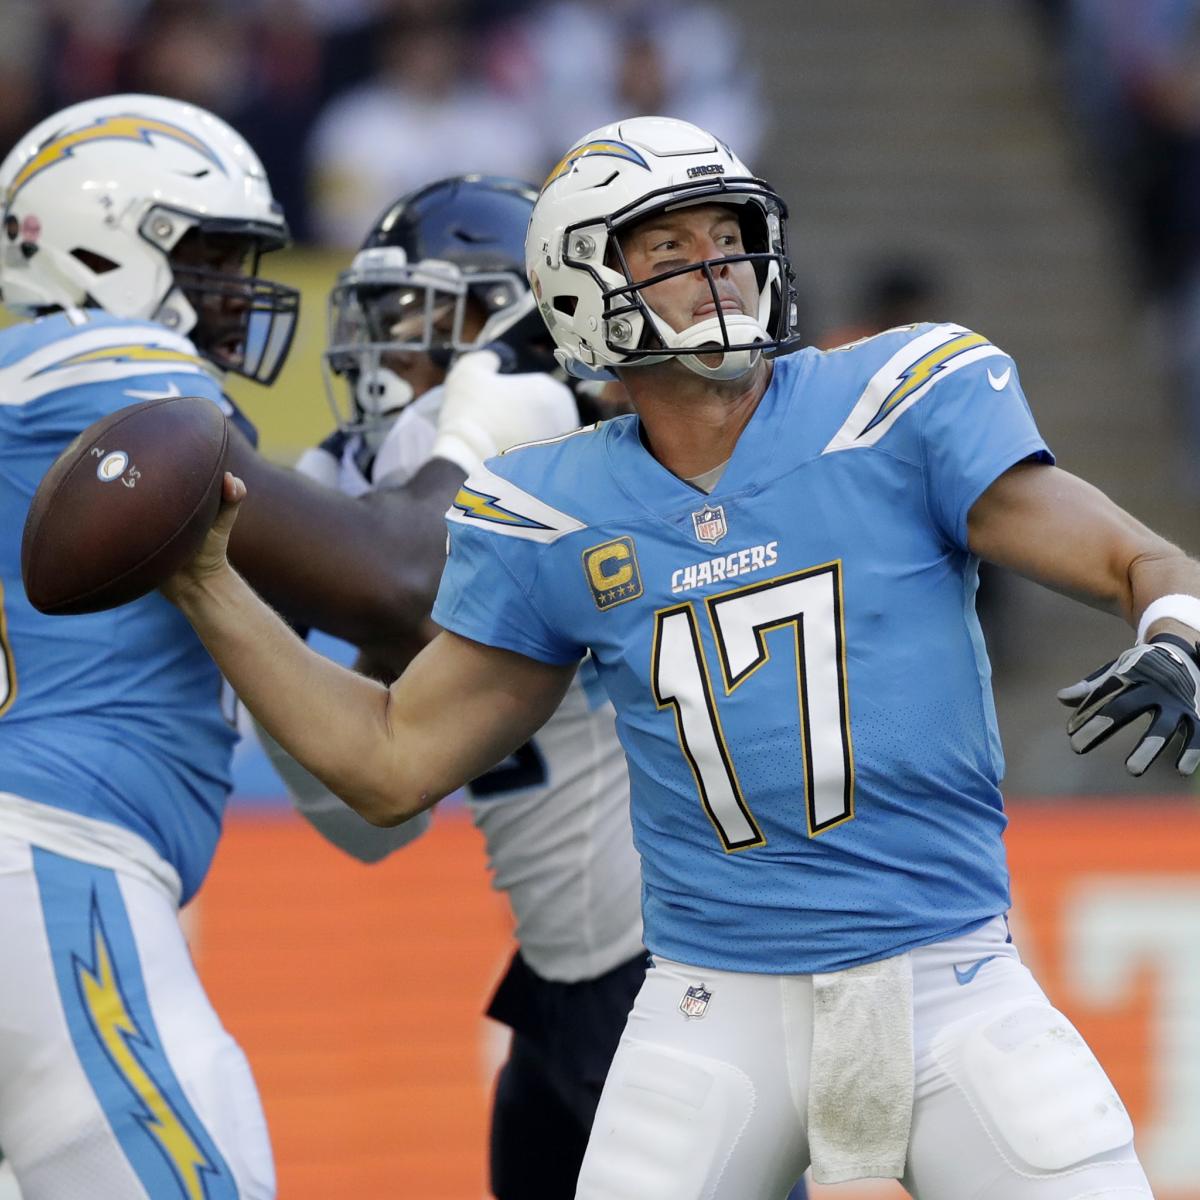 When will the Chargers wear each uniform?